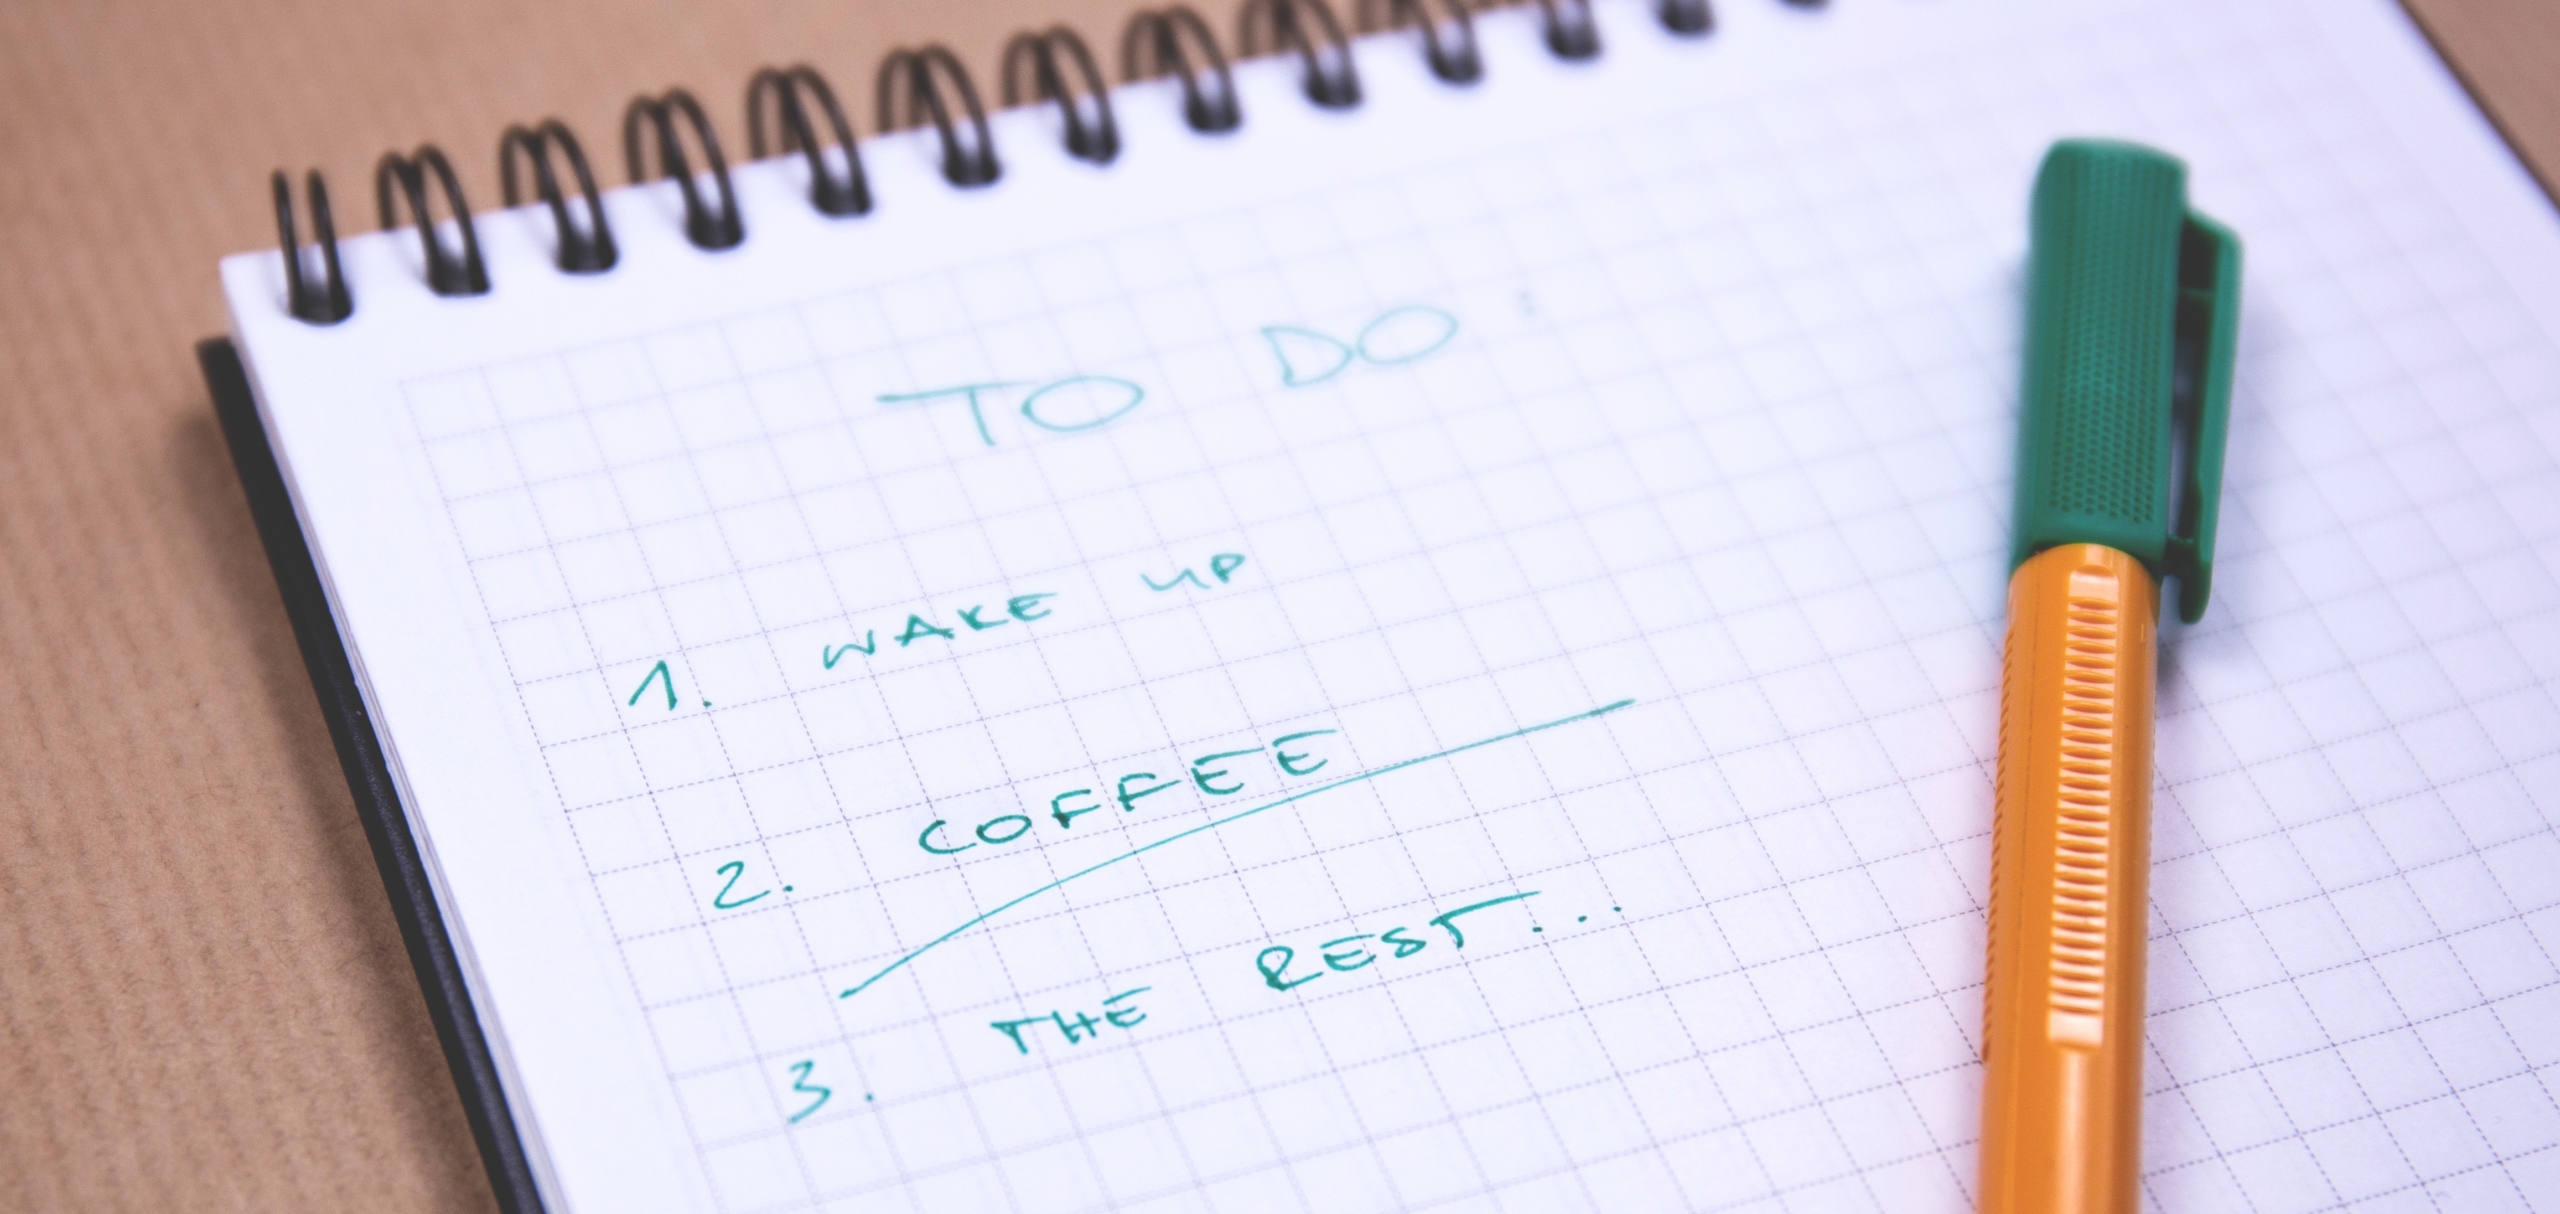 Photo of a notepad with a checklist on it highlighting 'coffee'